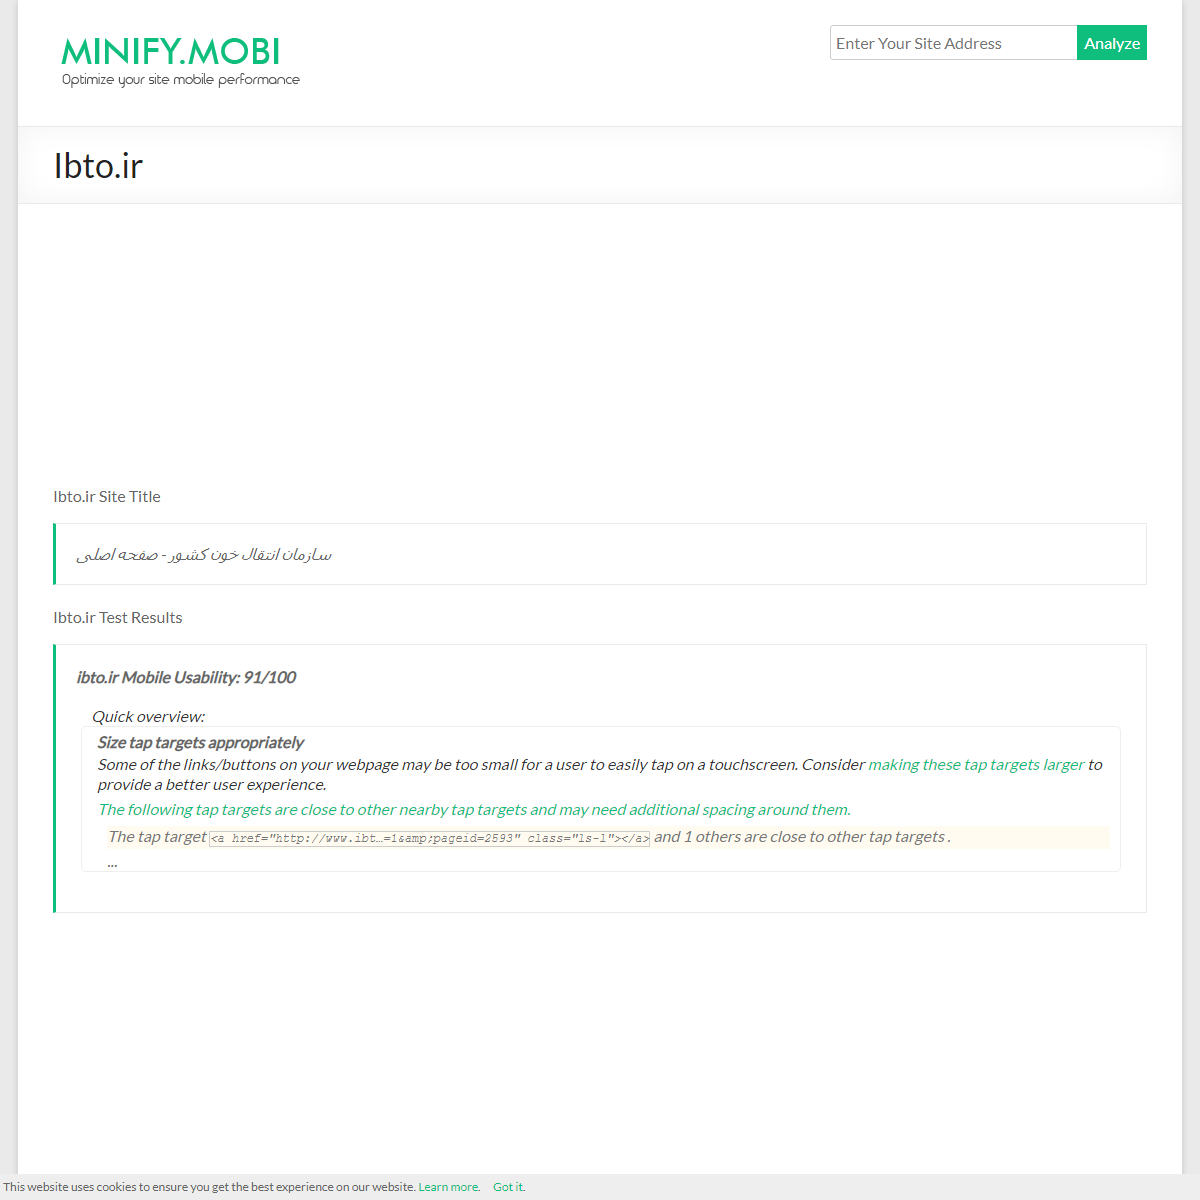 A complete backup of https://minify.mobi/results/ibto.ir